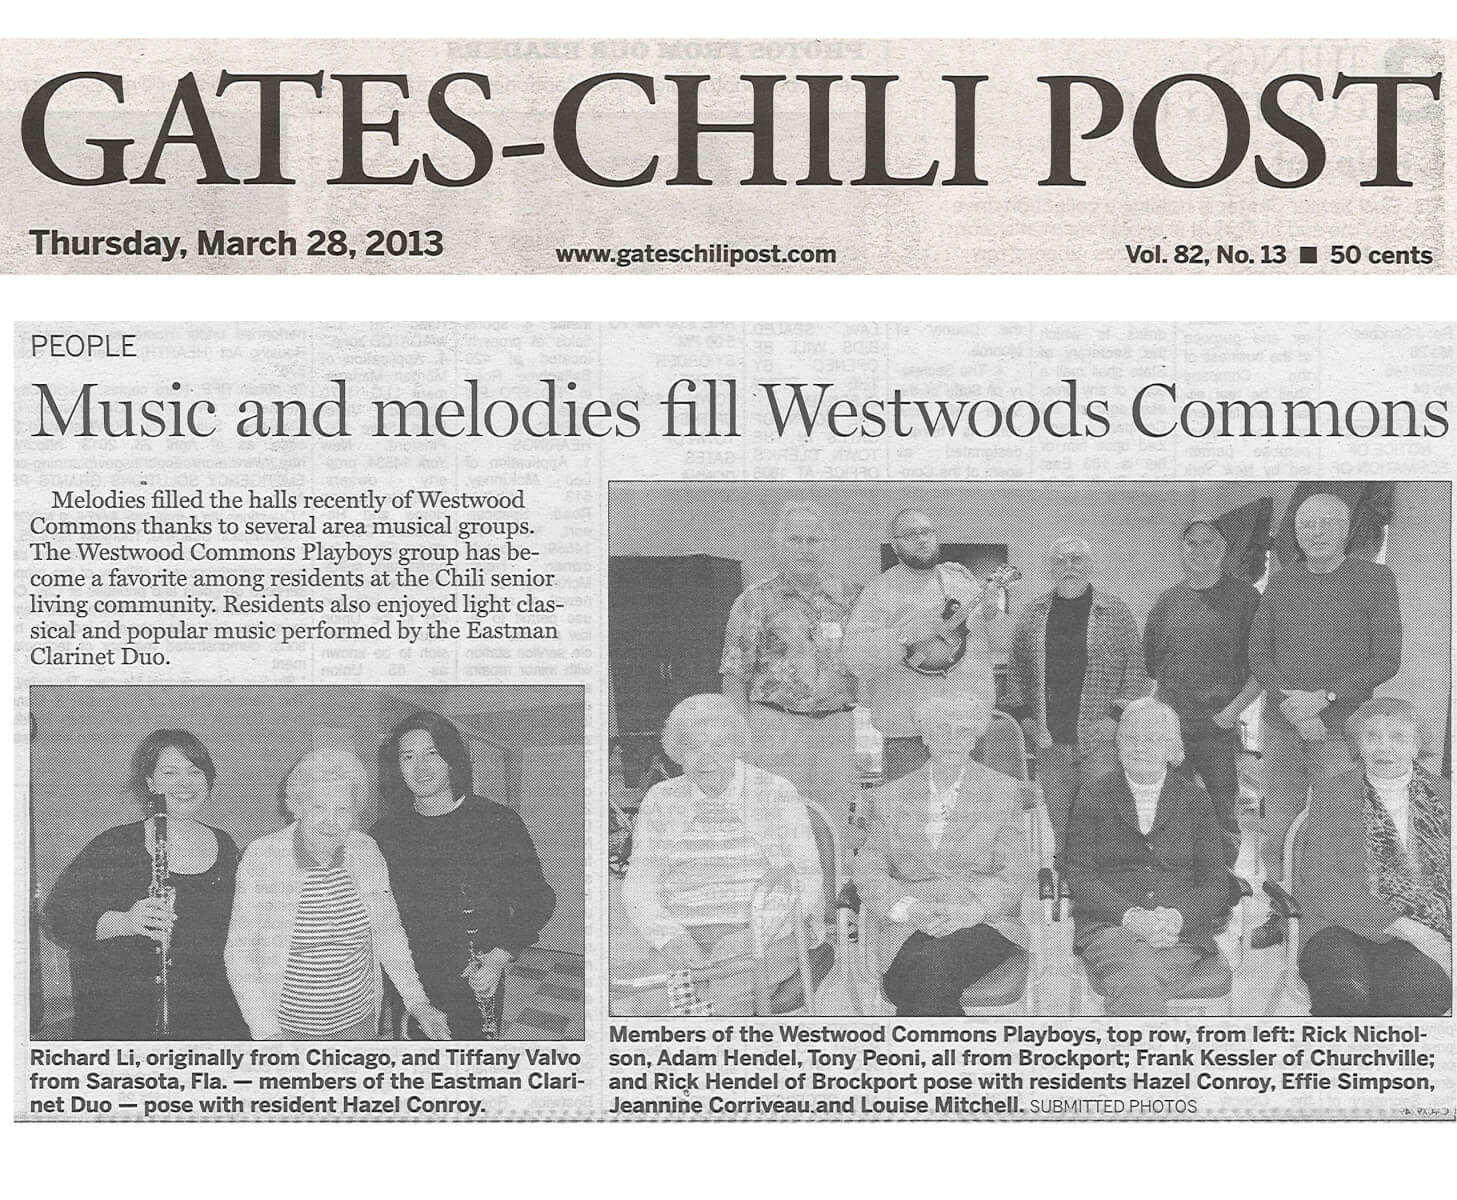 Westwood Commons Musicians Story in the Gates Chili Post March 28, 2013